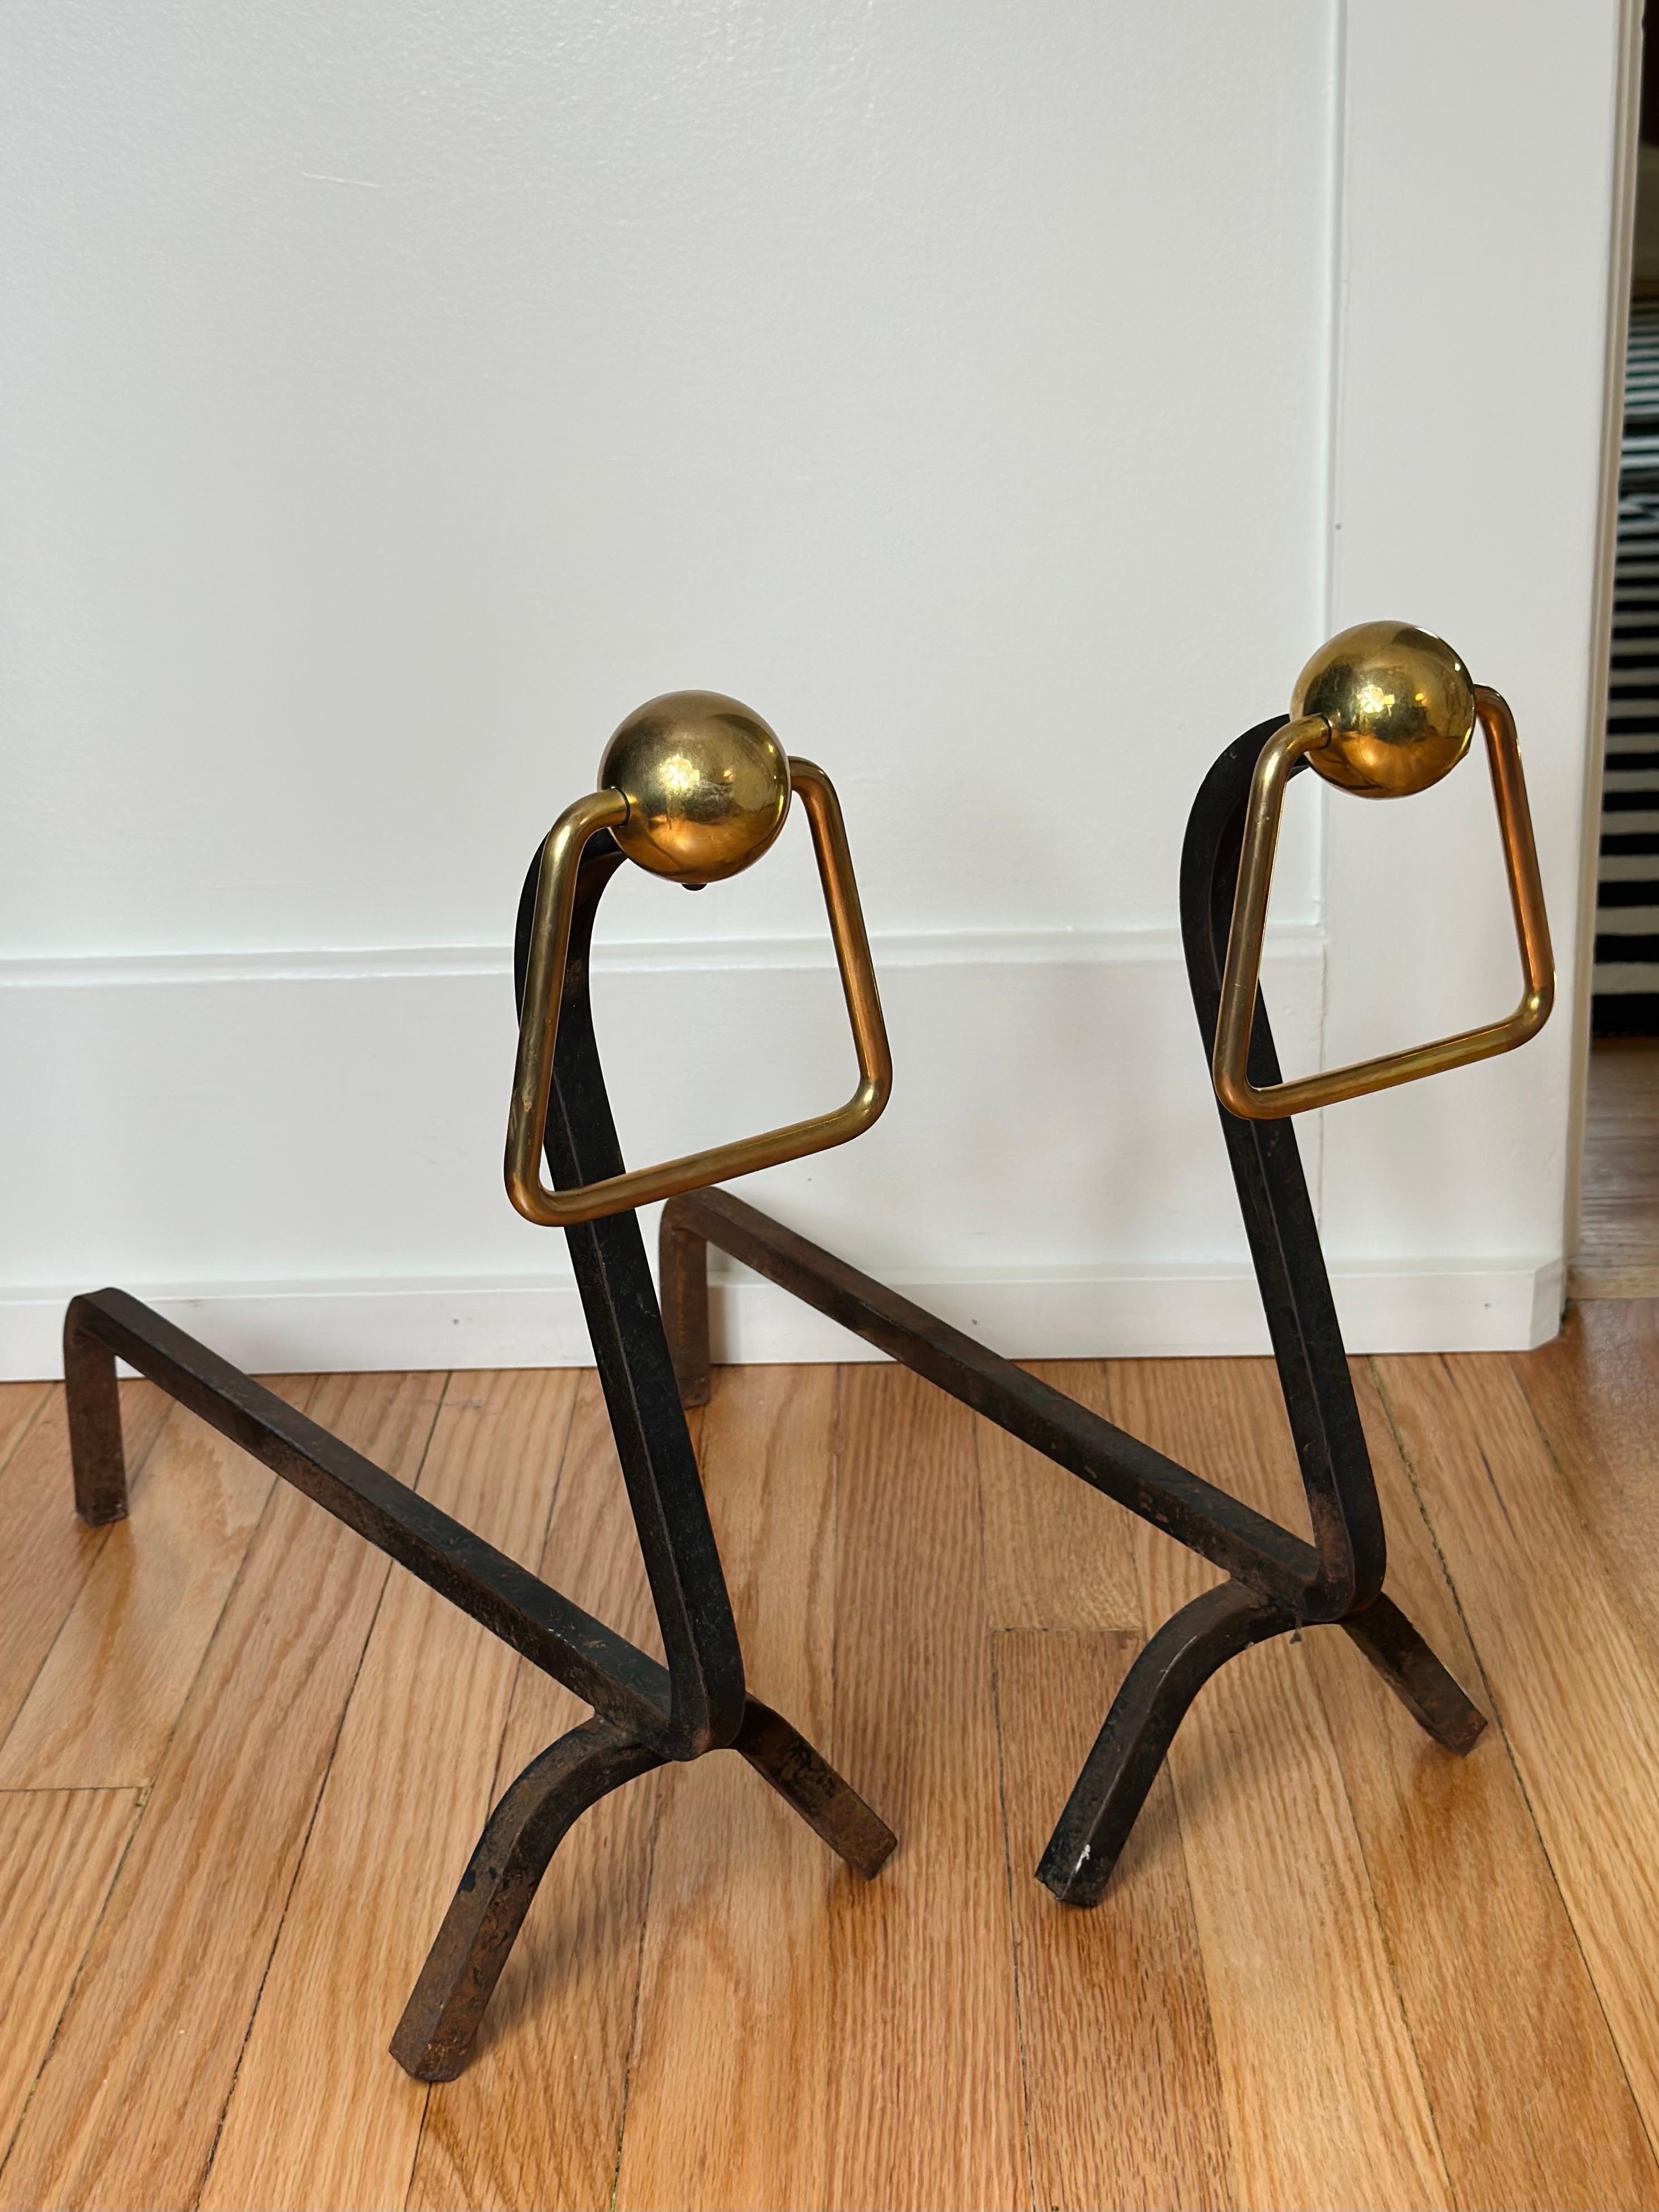 French 1940s Modernist Jacques Adnet Style Wrought Iron and Brass Andirons - a Pair For Sale